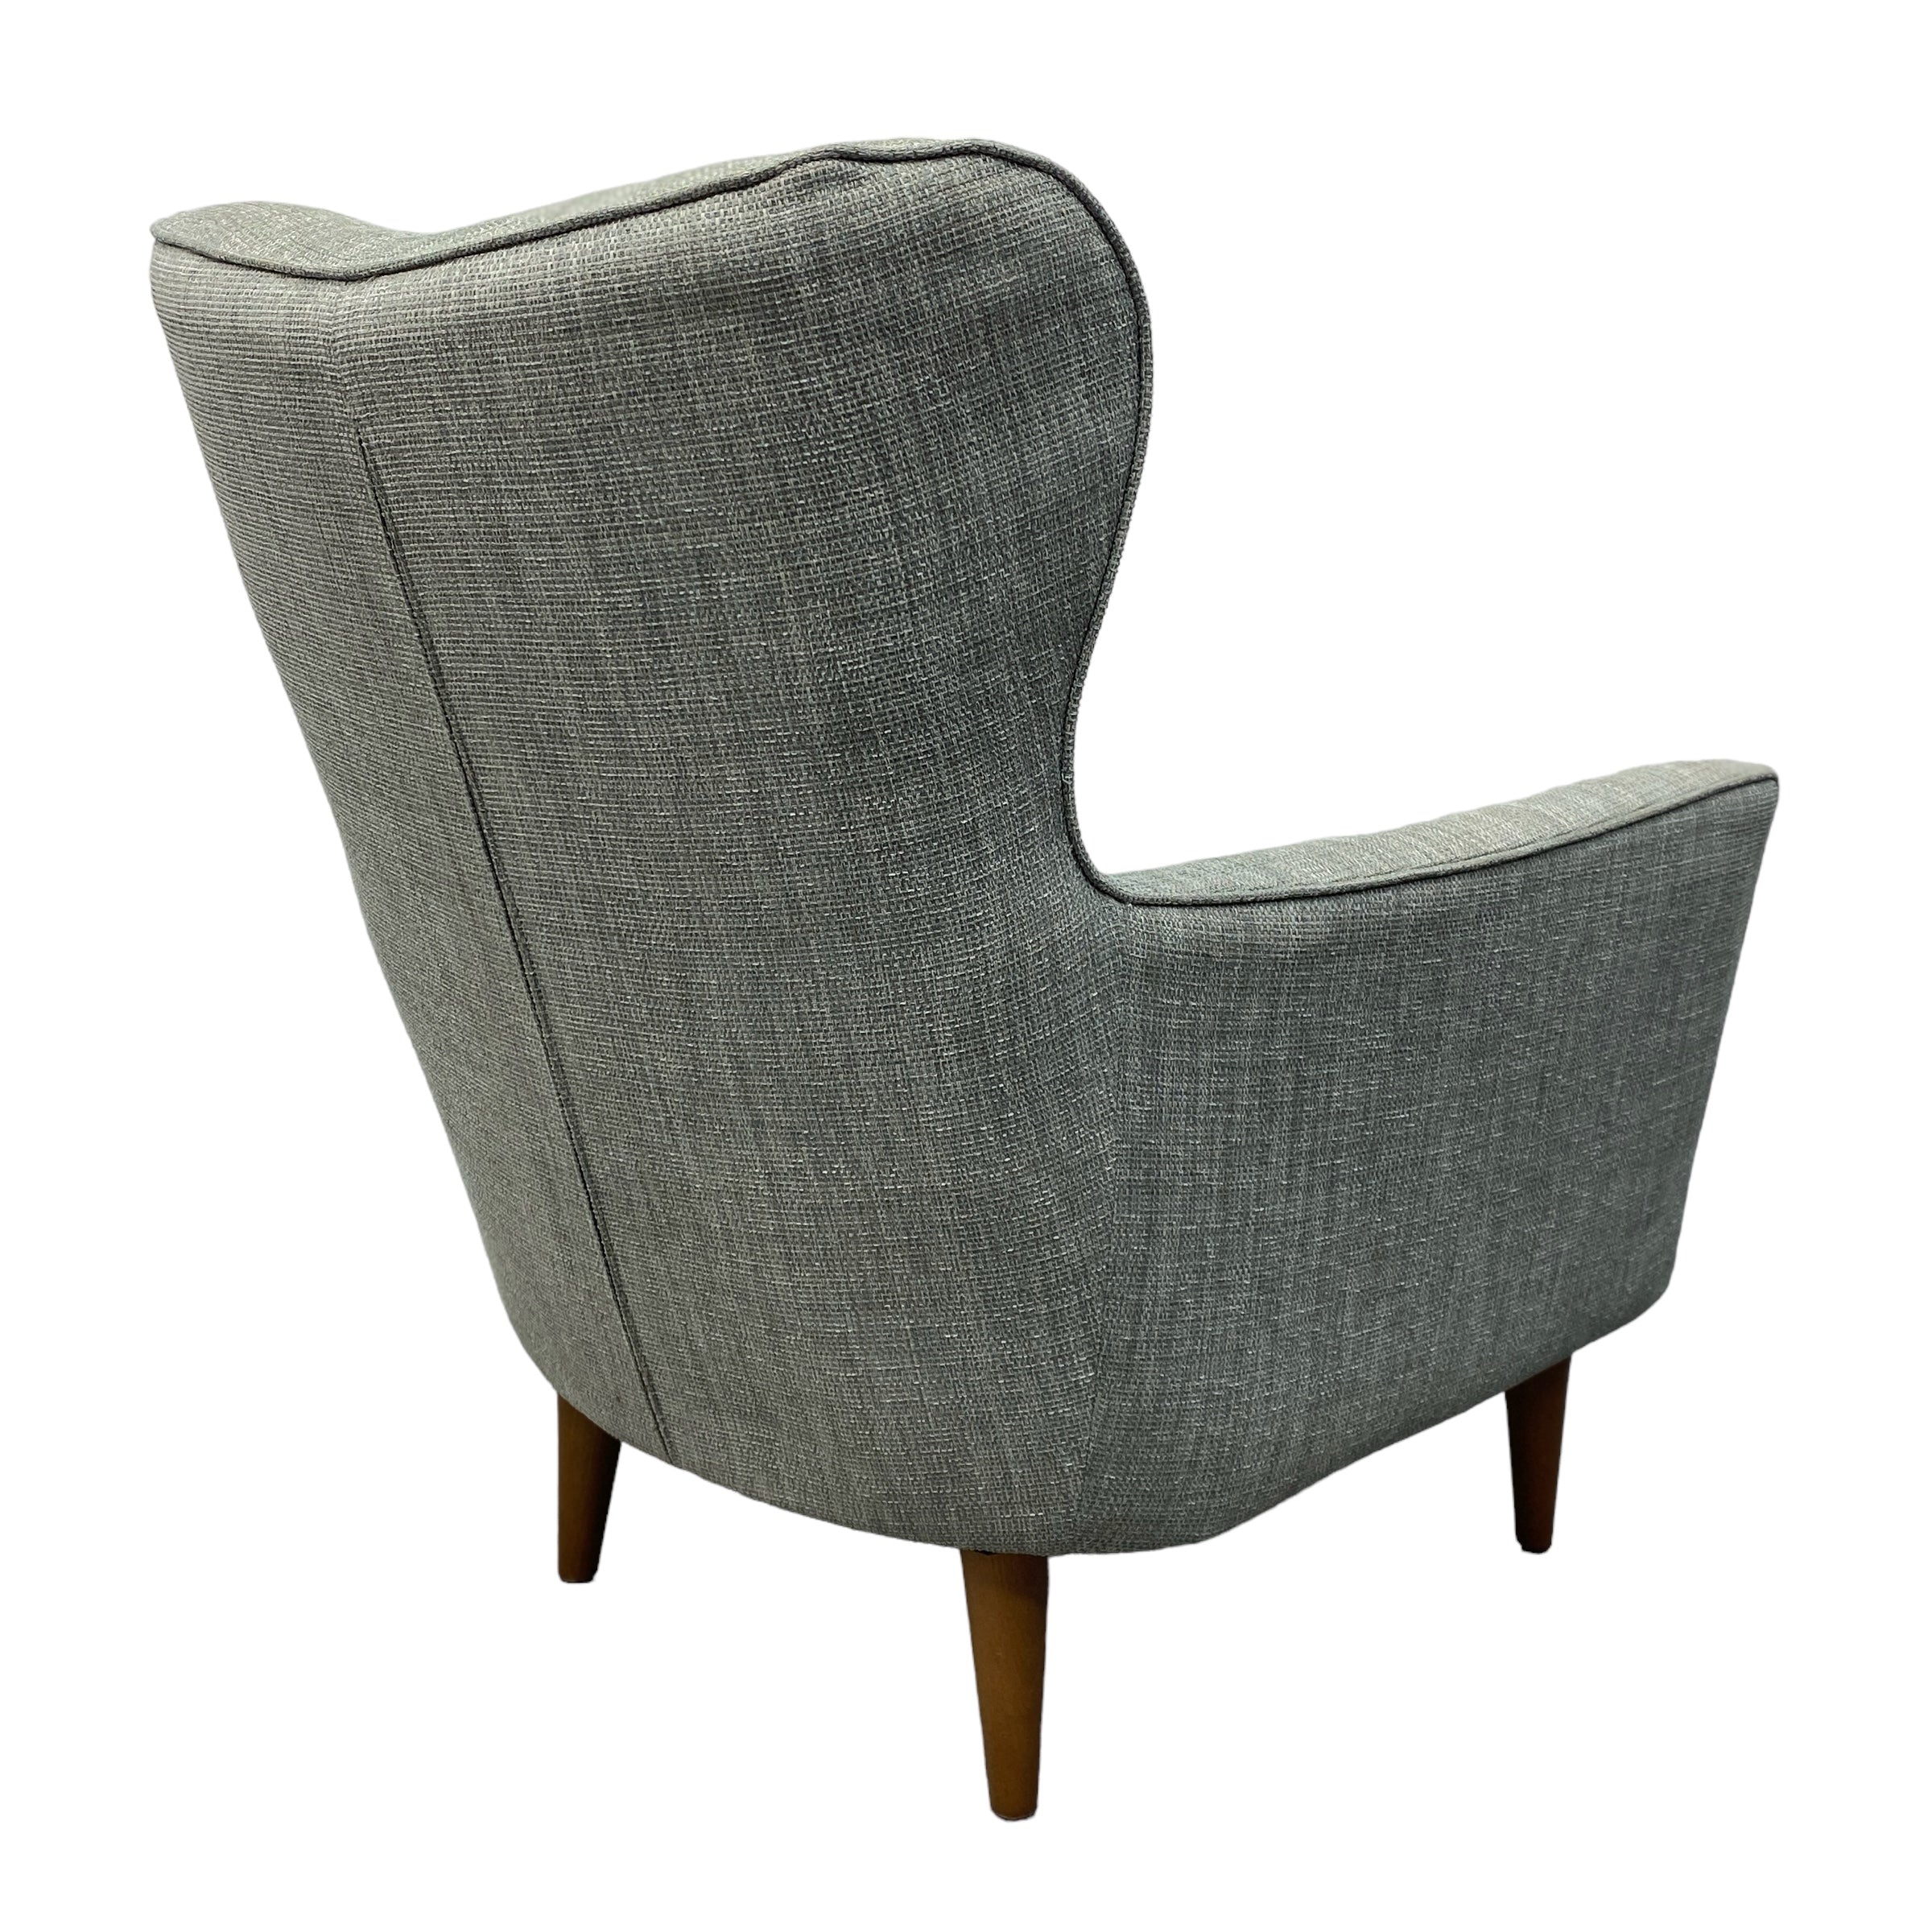 Legs Of Contemporary Lounge Chair Teal